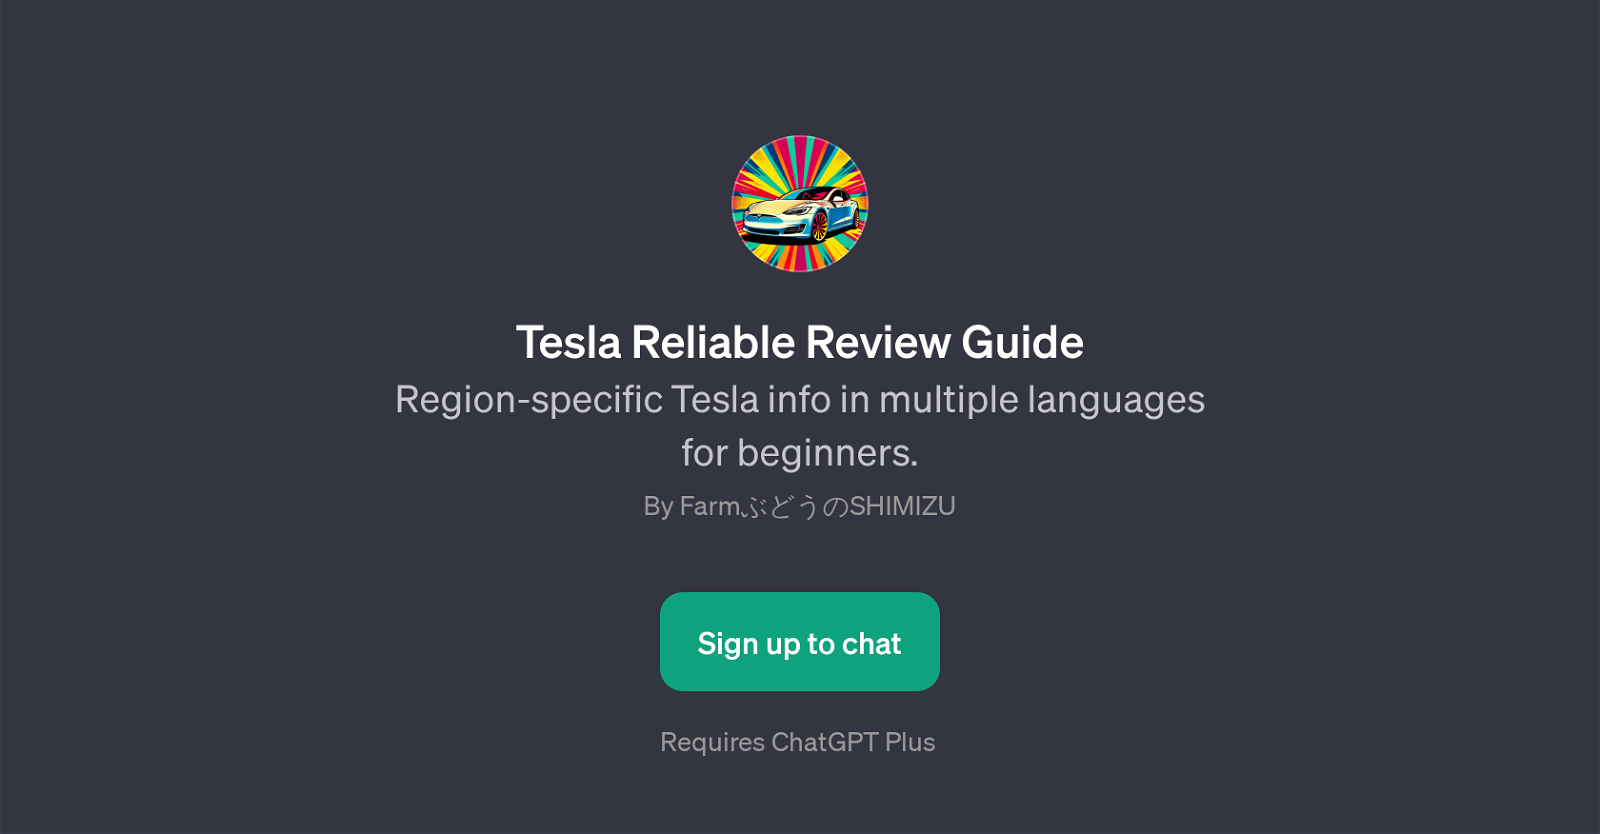 Tesla Reliable Review Guide website